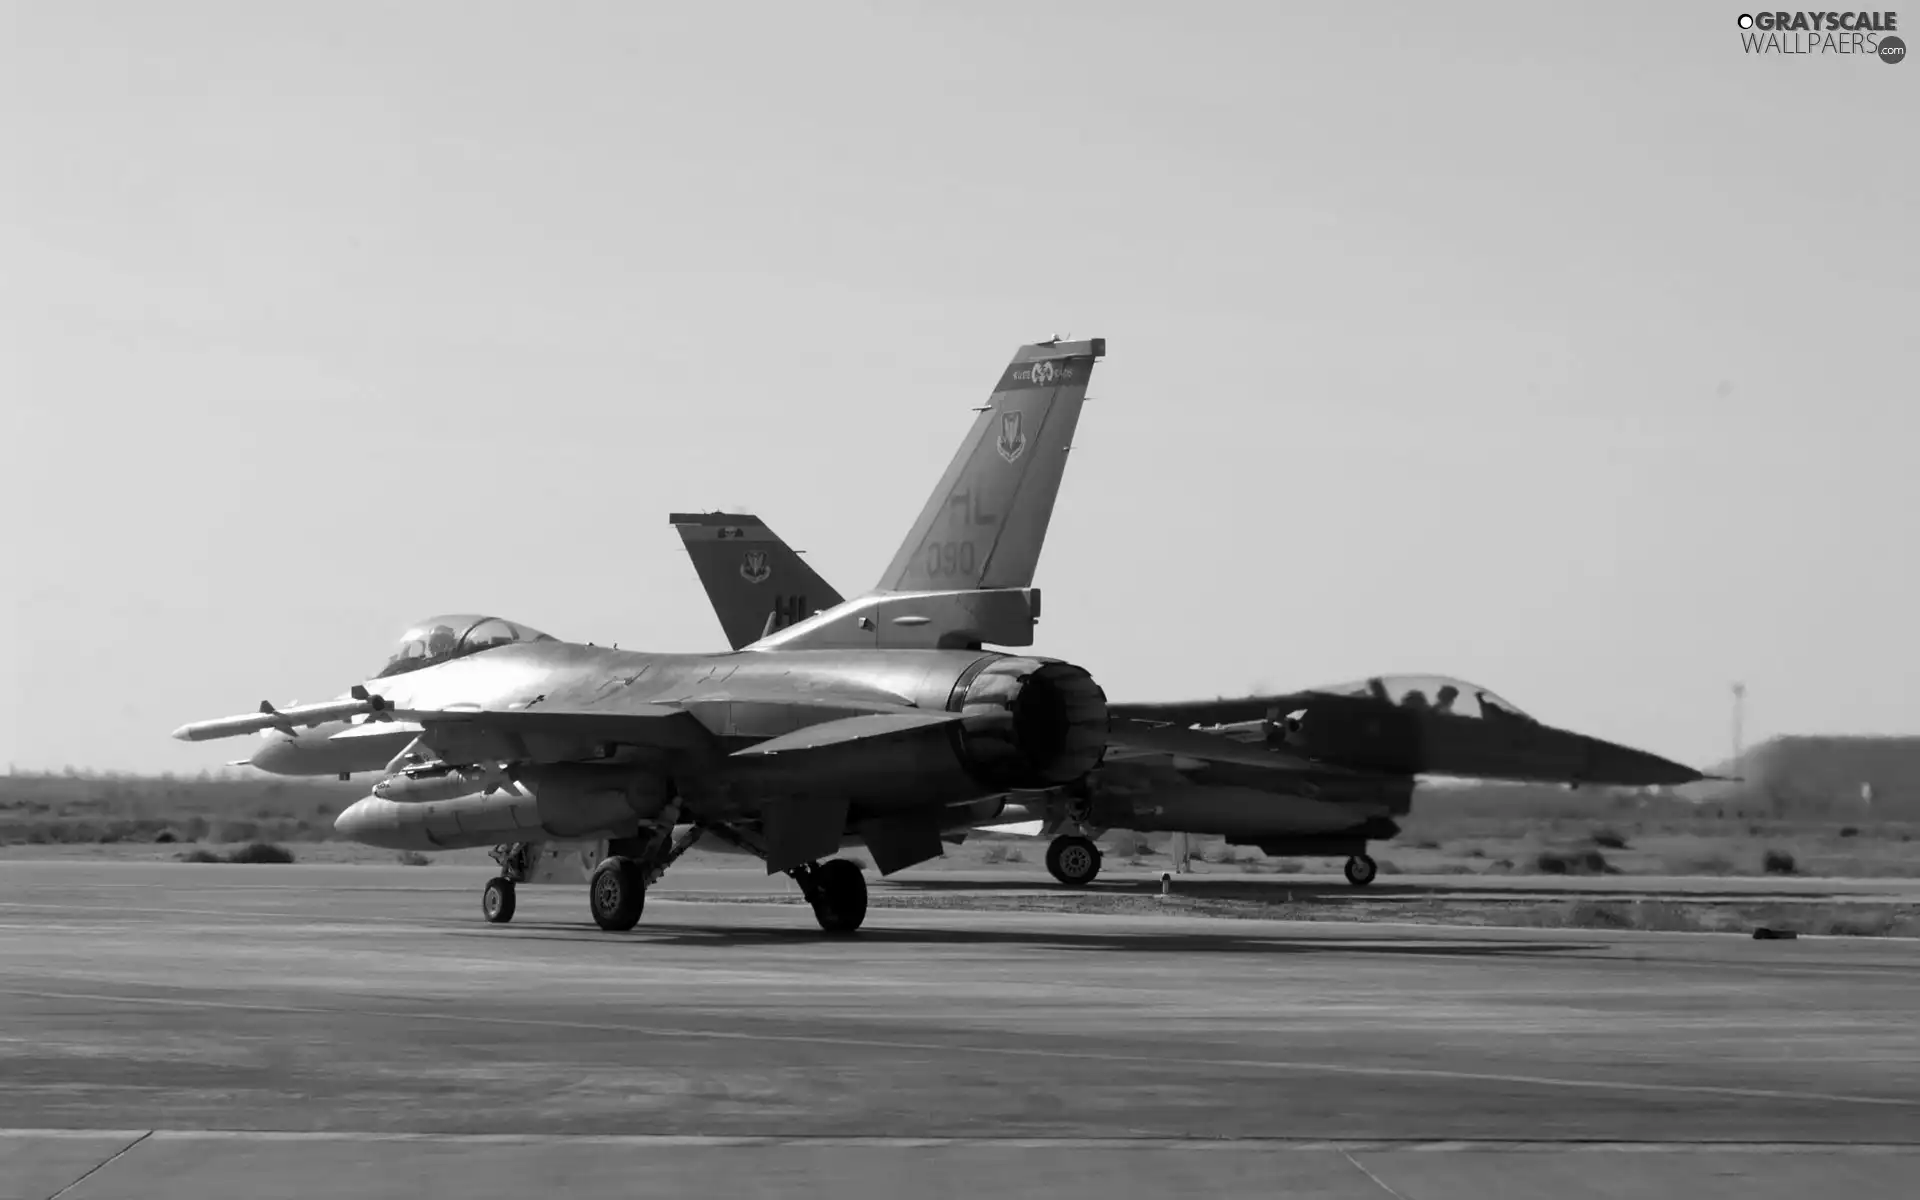 Fighters, airport, F-16